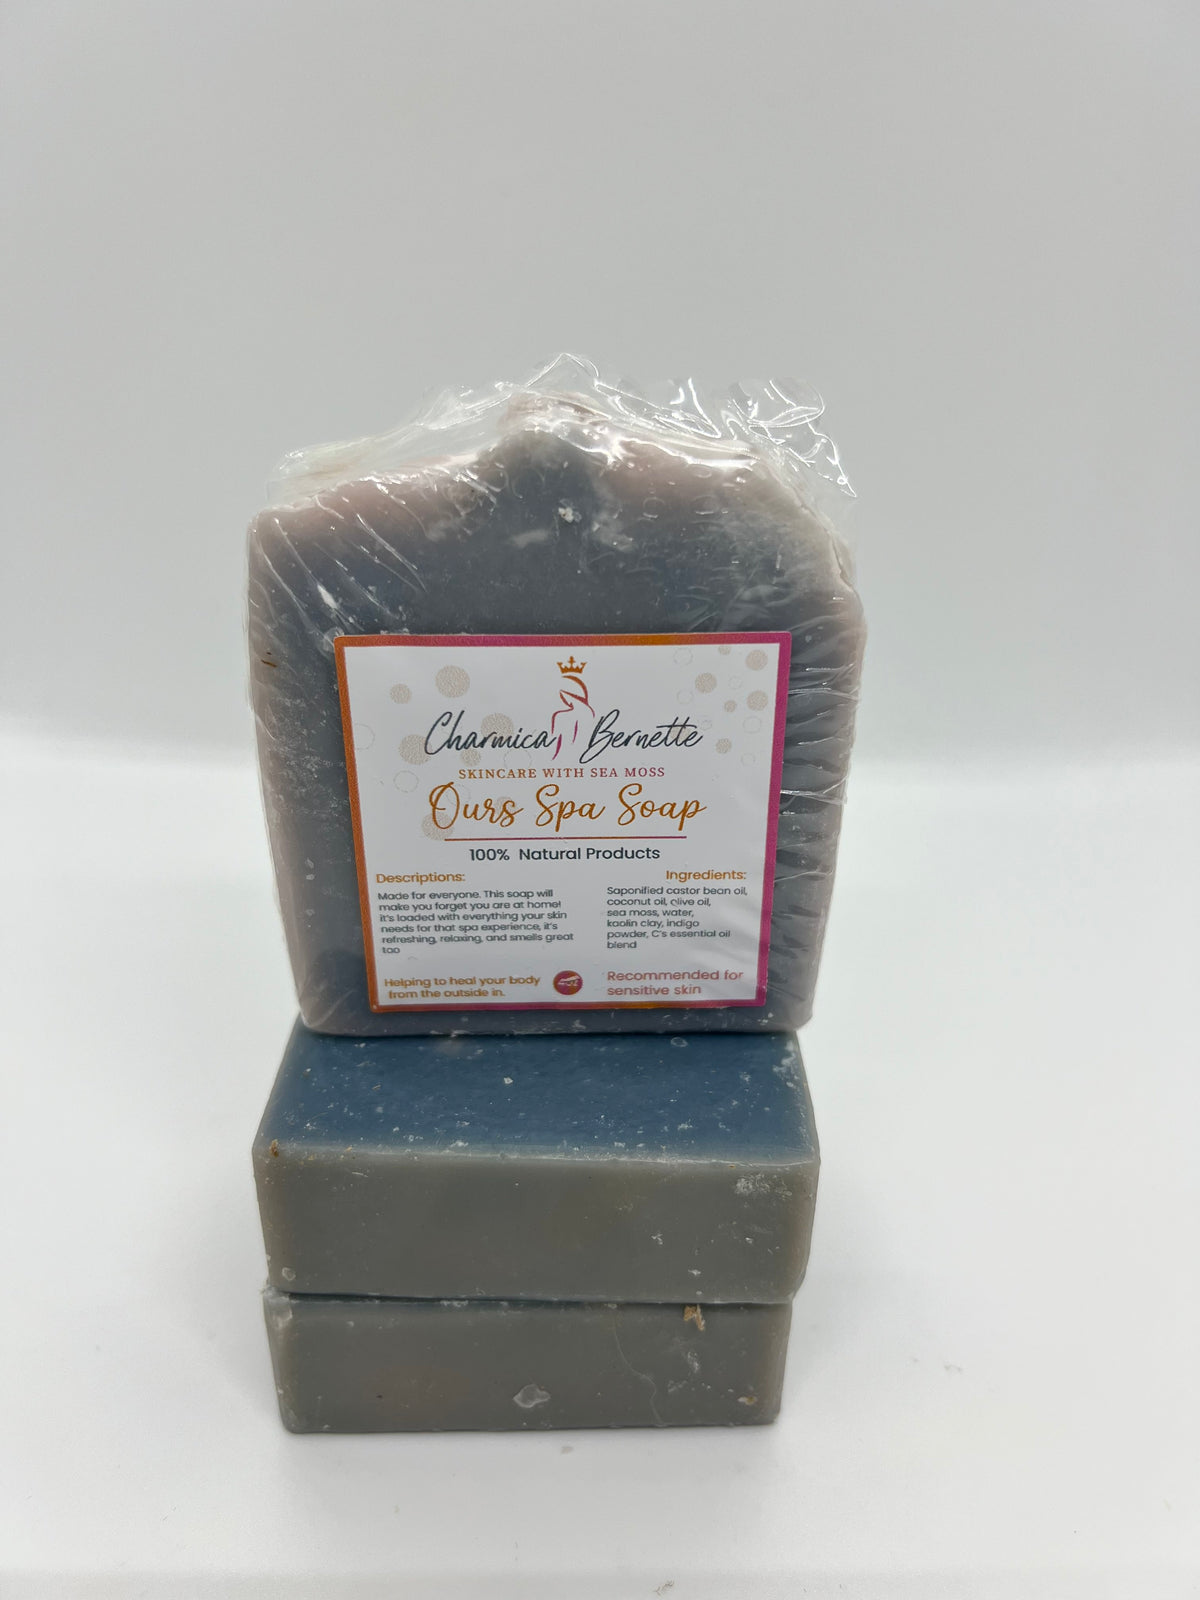 “Ours” + Sea Moss Spa Soap - Made For Everyone